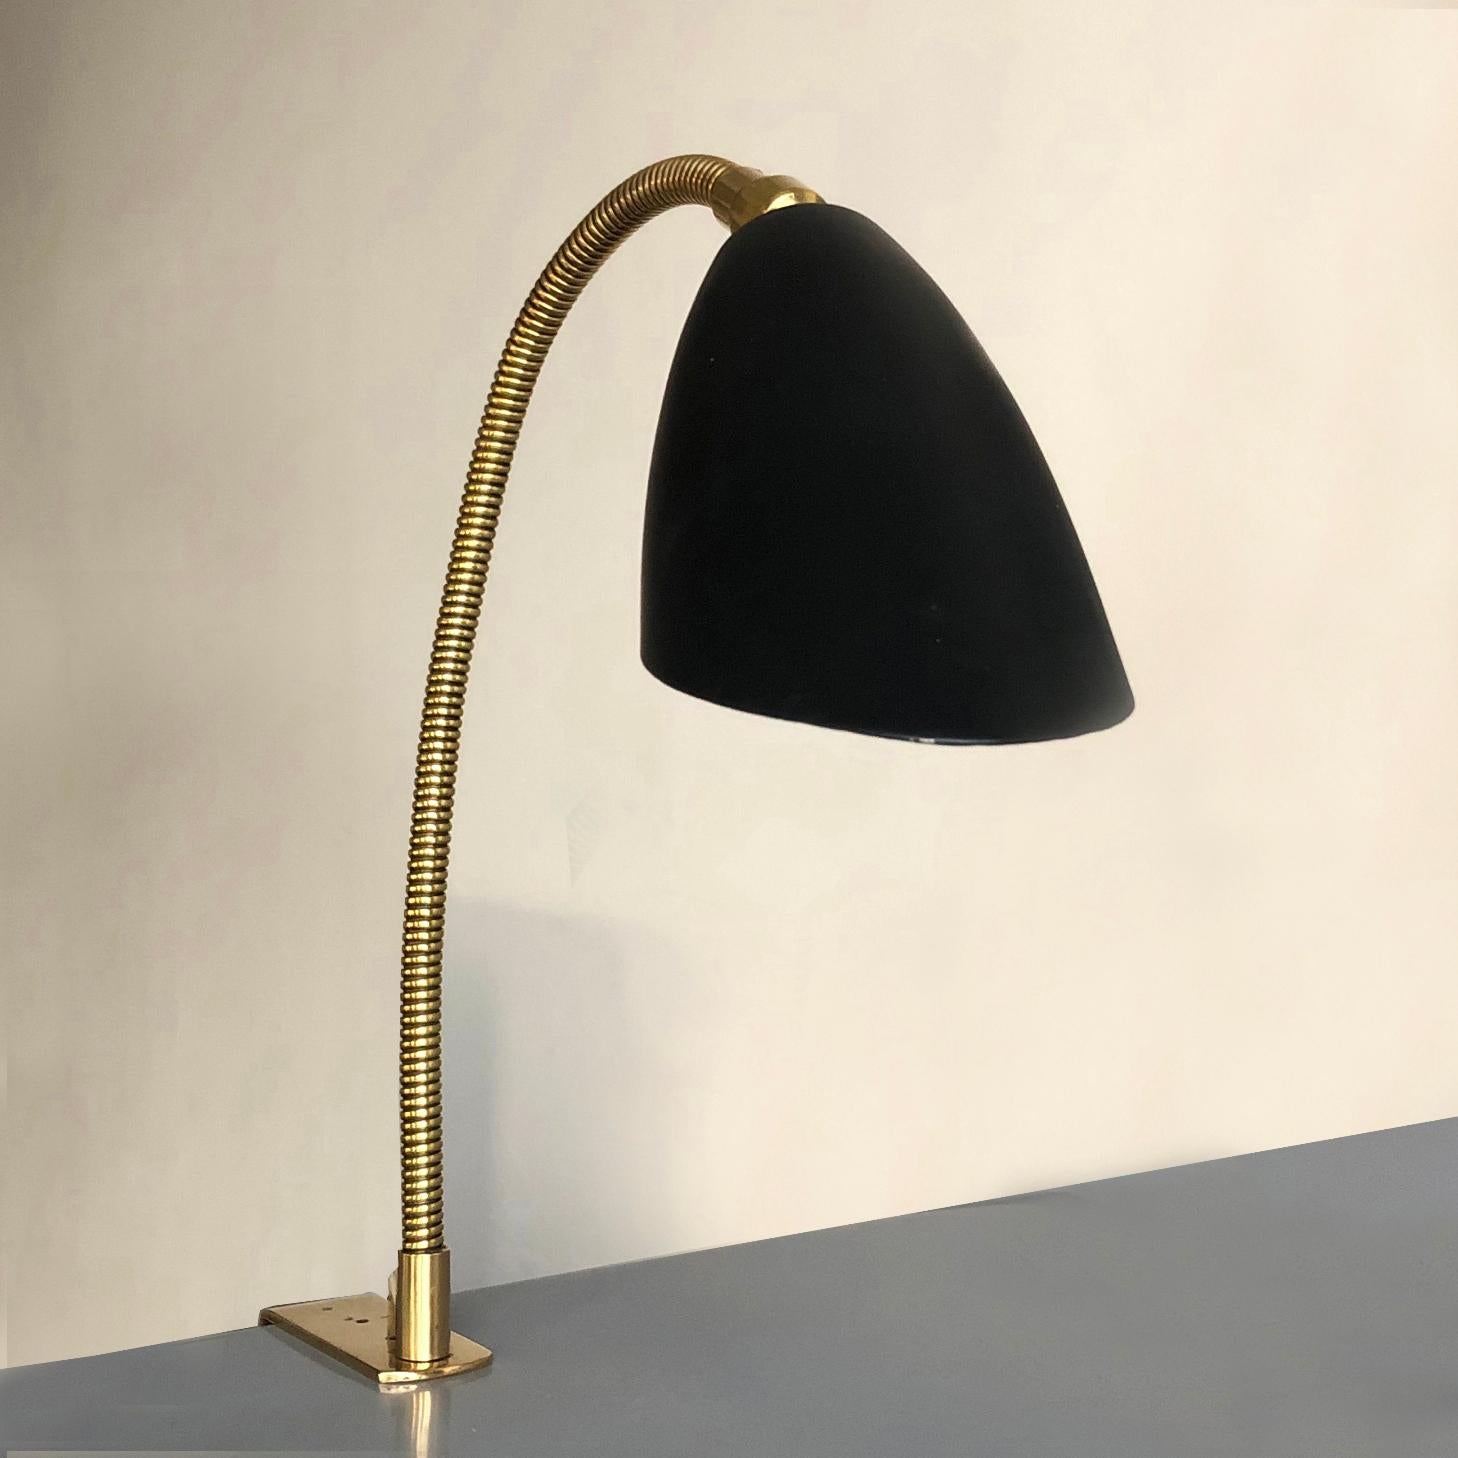 Italian Adjustable Clamp Brass Goose Neck Black Shade Table Task Light, Italy, 1950s For Sale